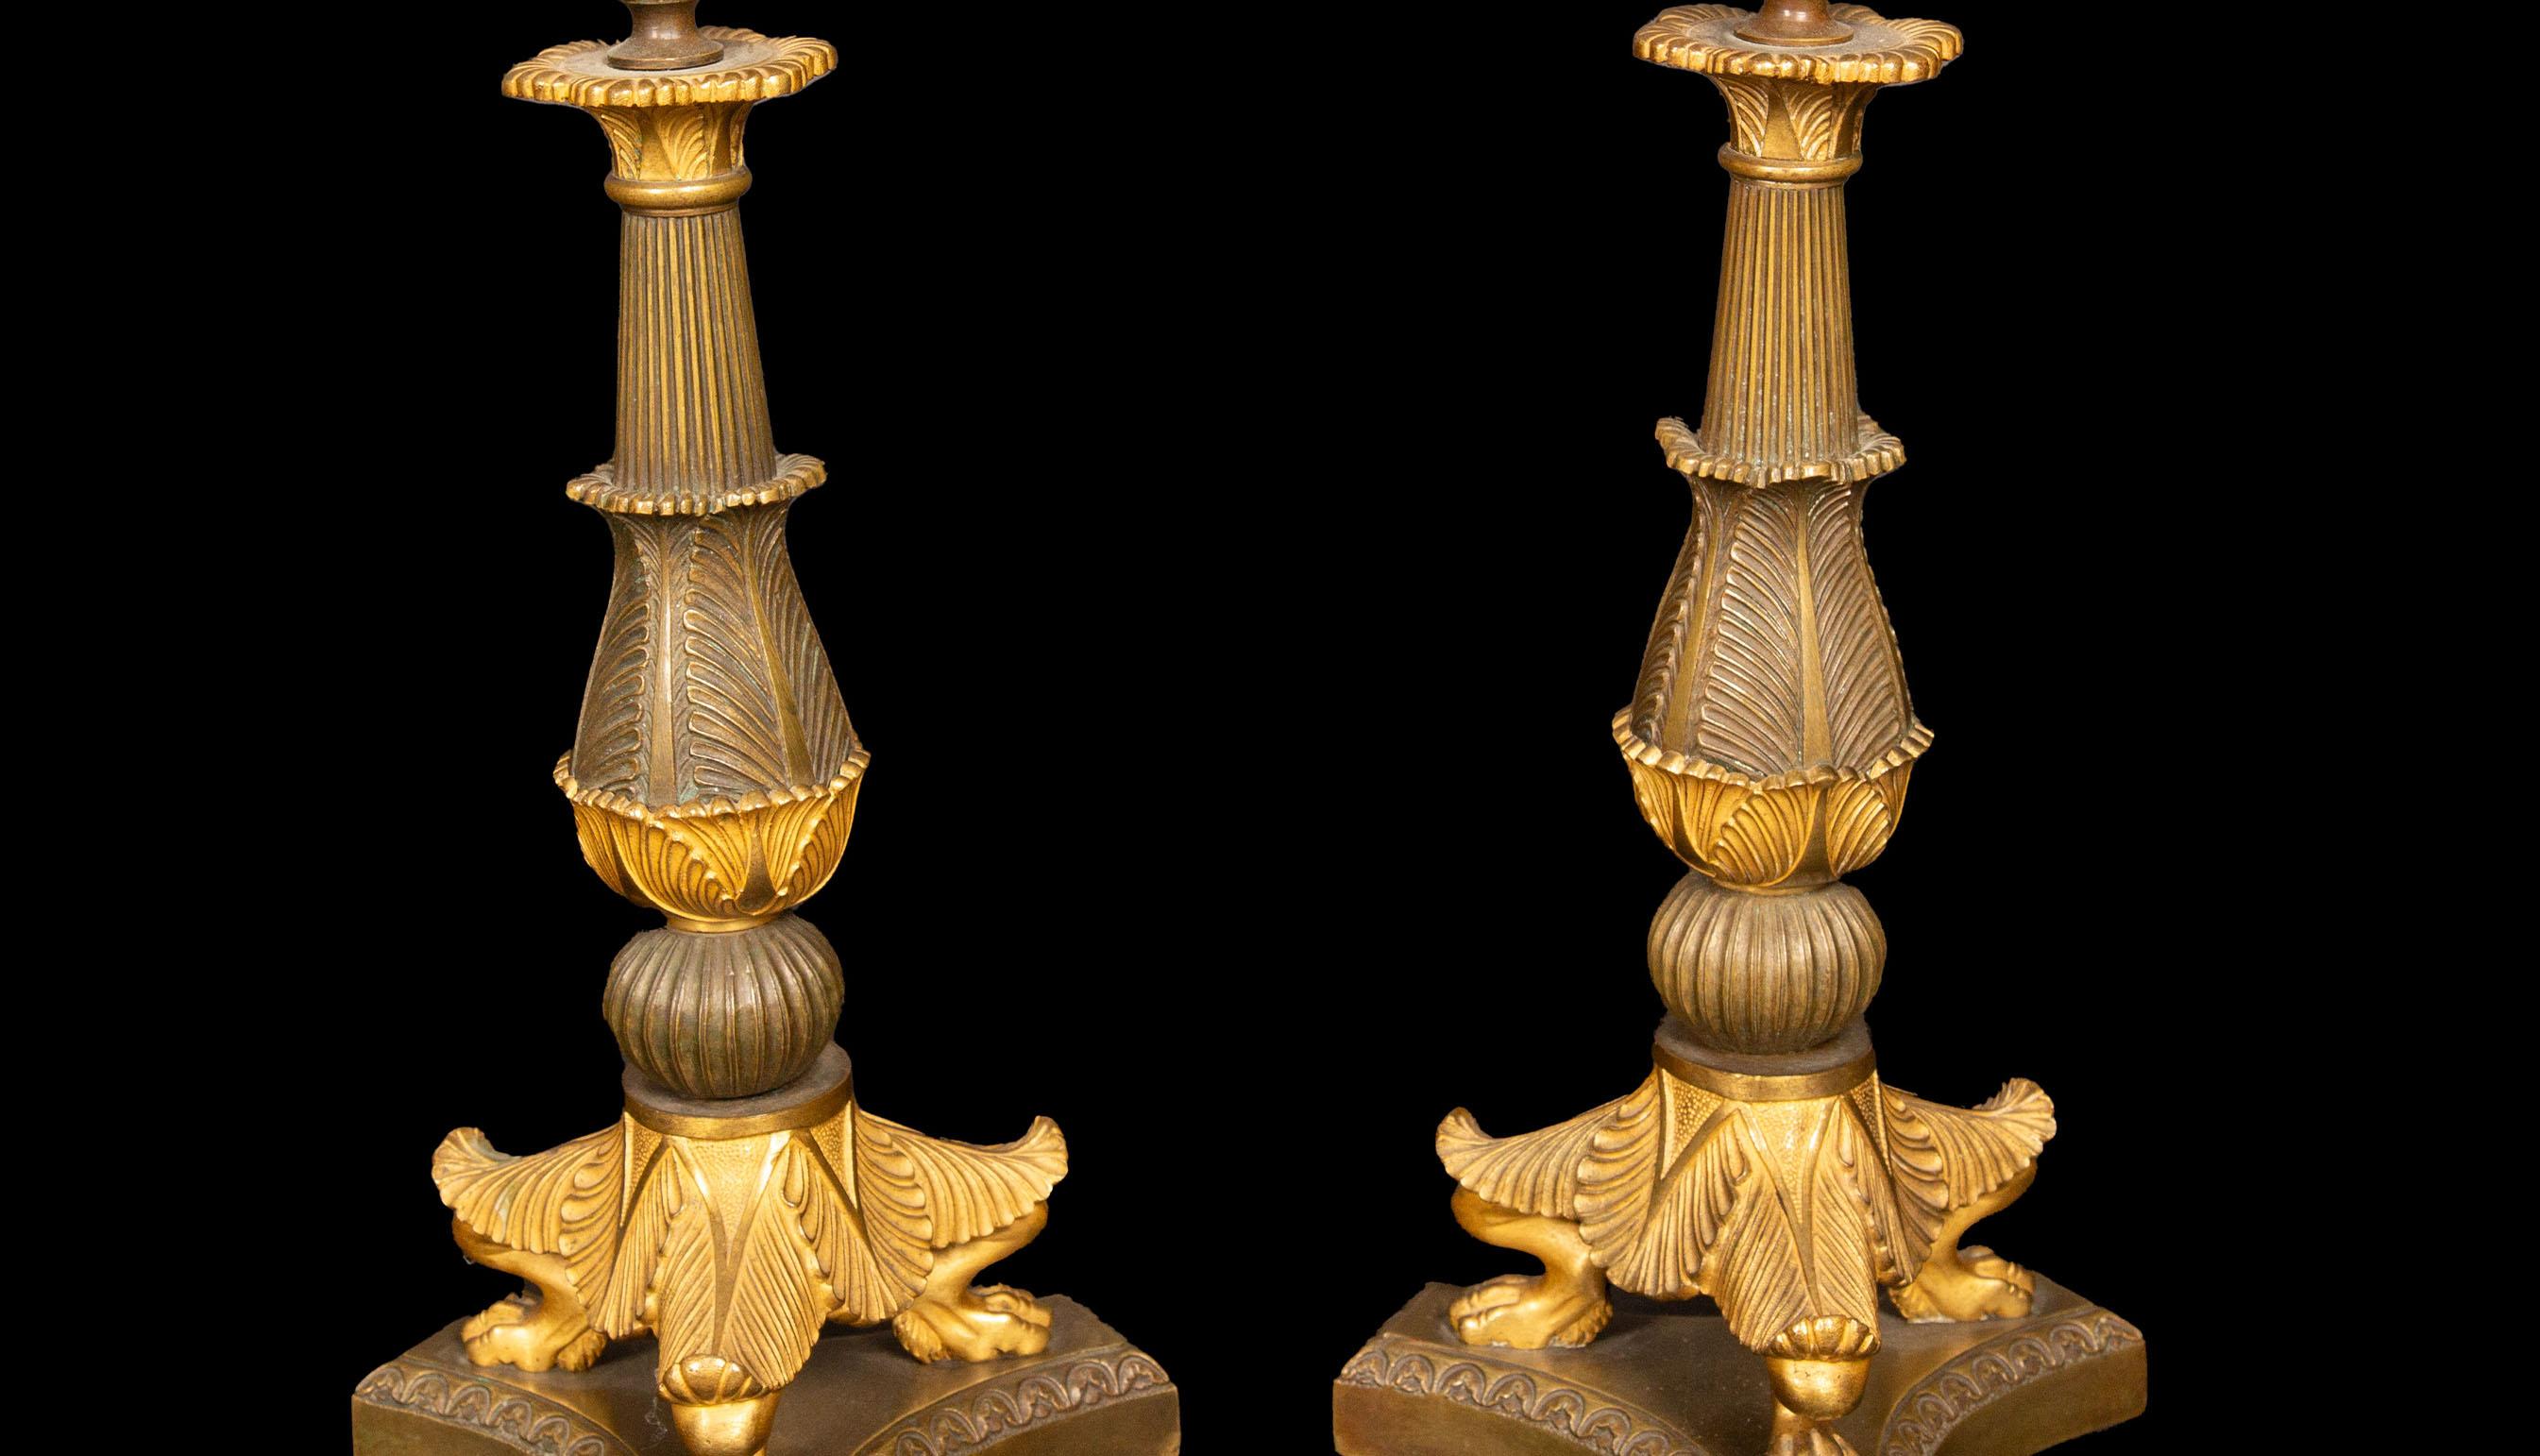 19th-century French Palmette Design Candle Sticks, a stunning testament to timeless elegance and craftsmanship. Meticulously crafted, these candlesticks showcase the iconic French Palmette design with gracefully curved palm fronds and intricate